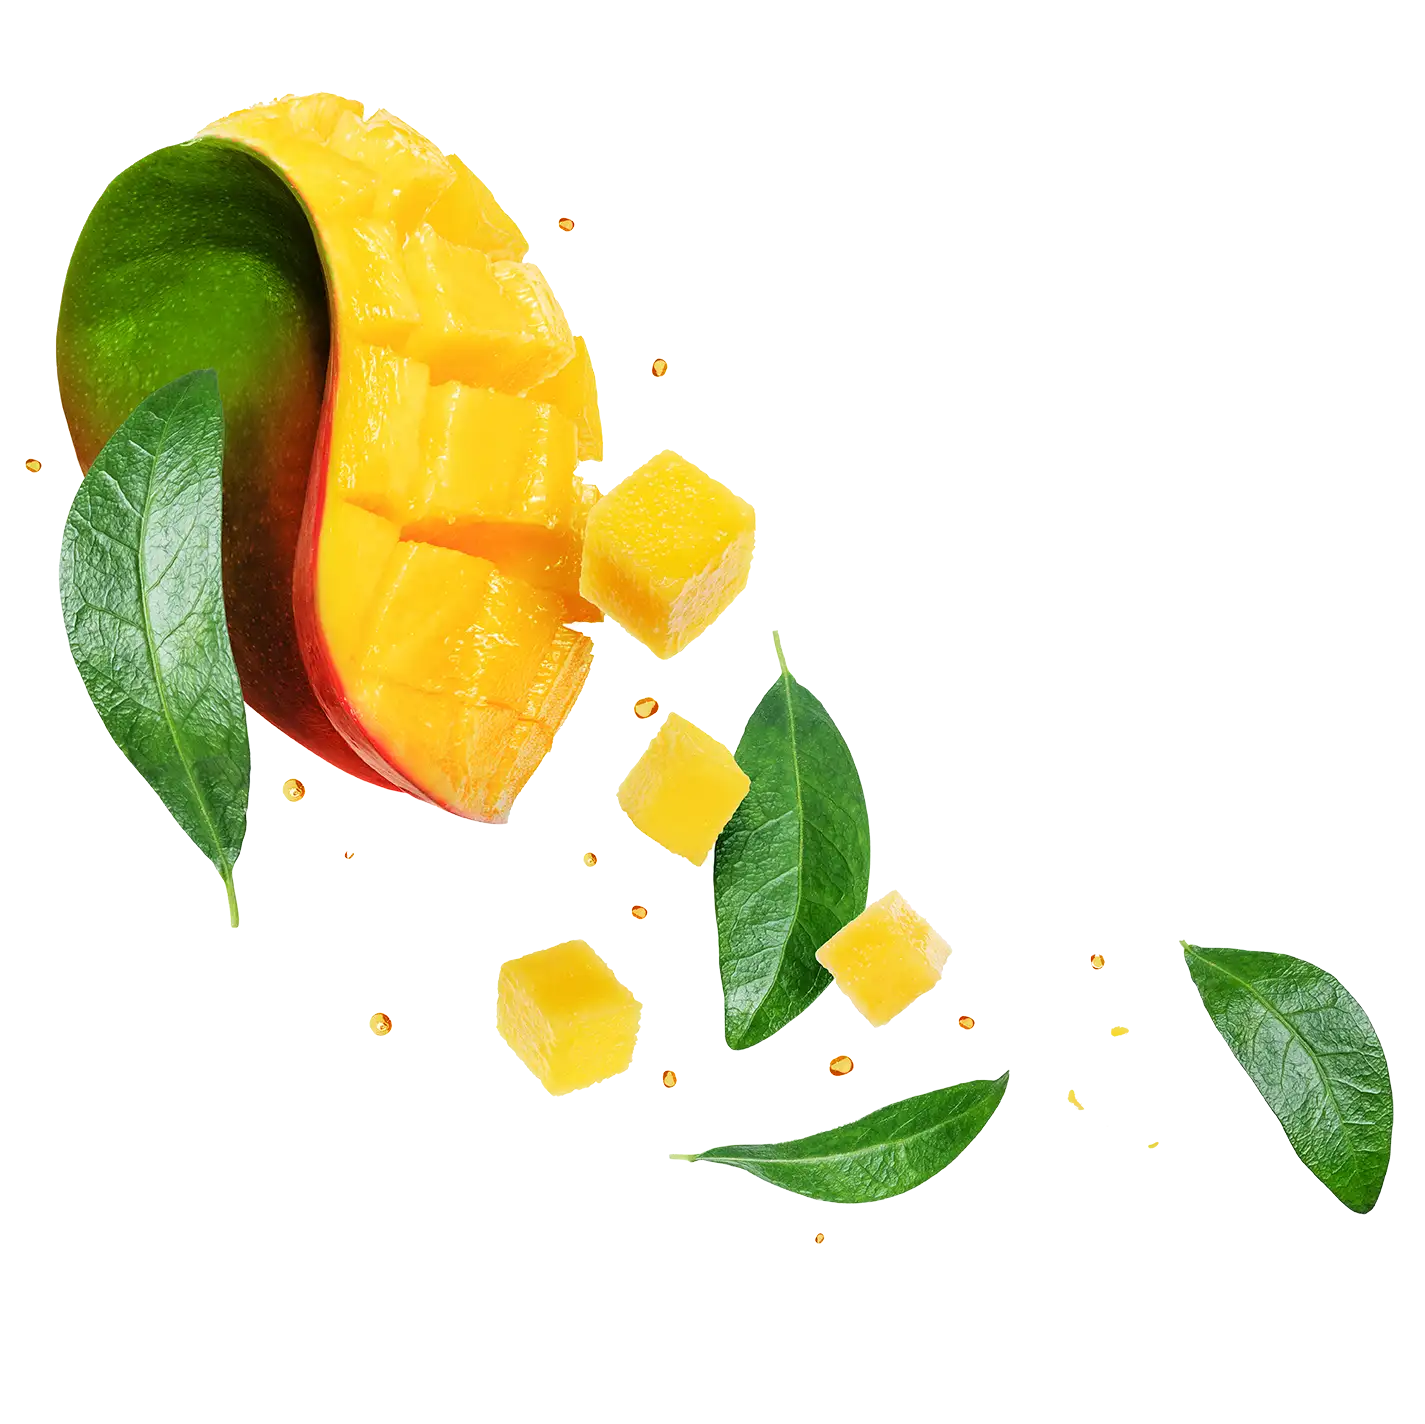 Cut up mango with some green leaves falling away from the mango